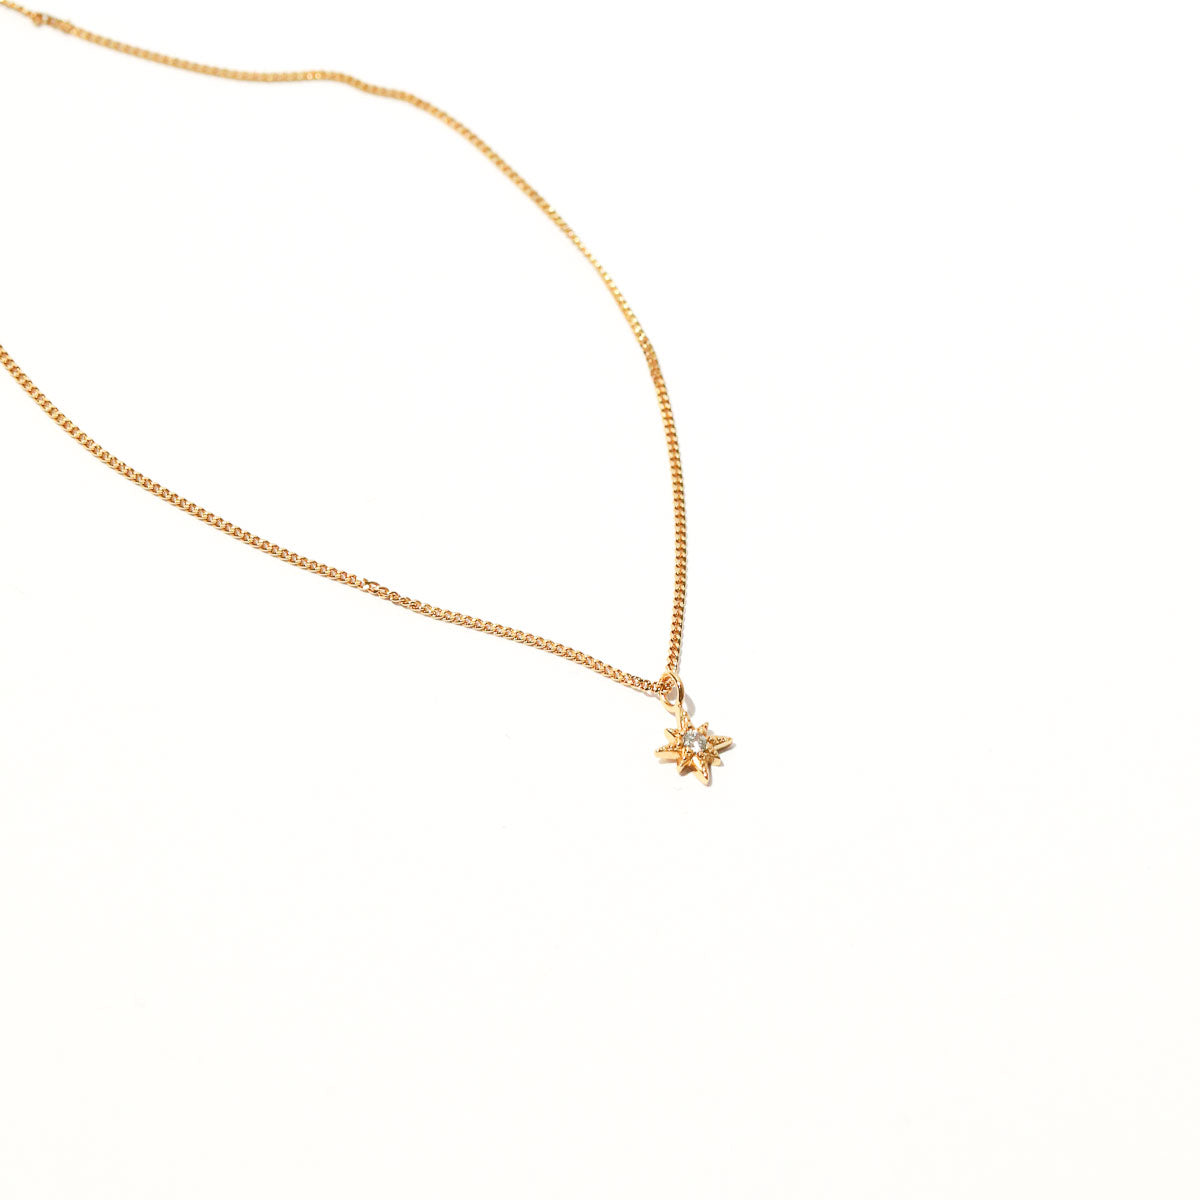 Twilight Star Pendant Necklace in Gold flat lay